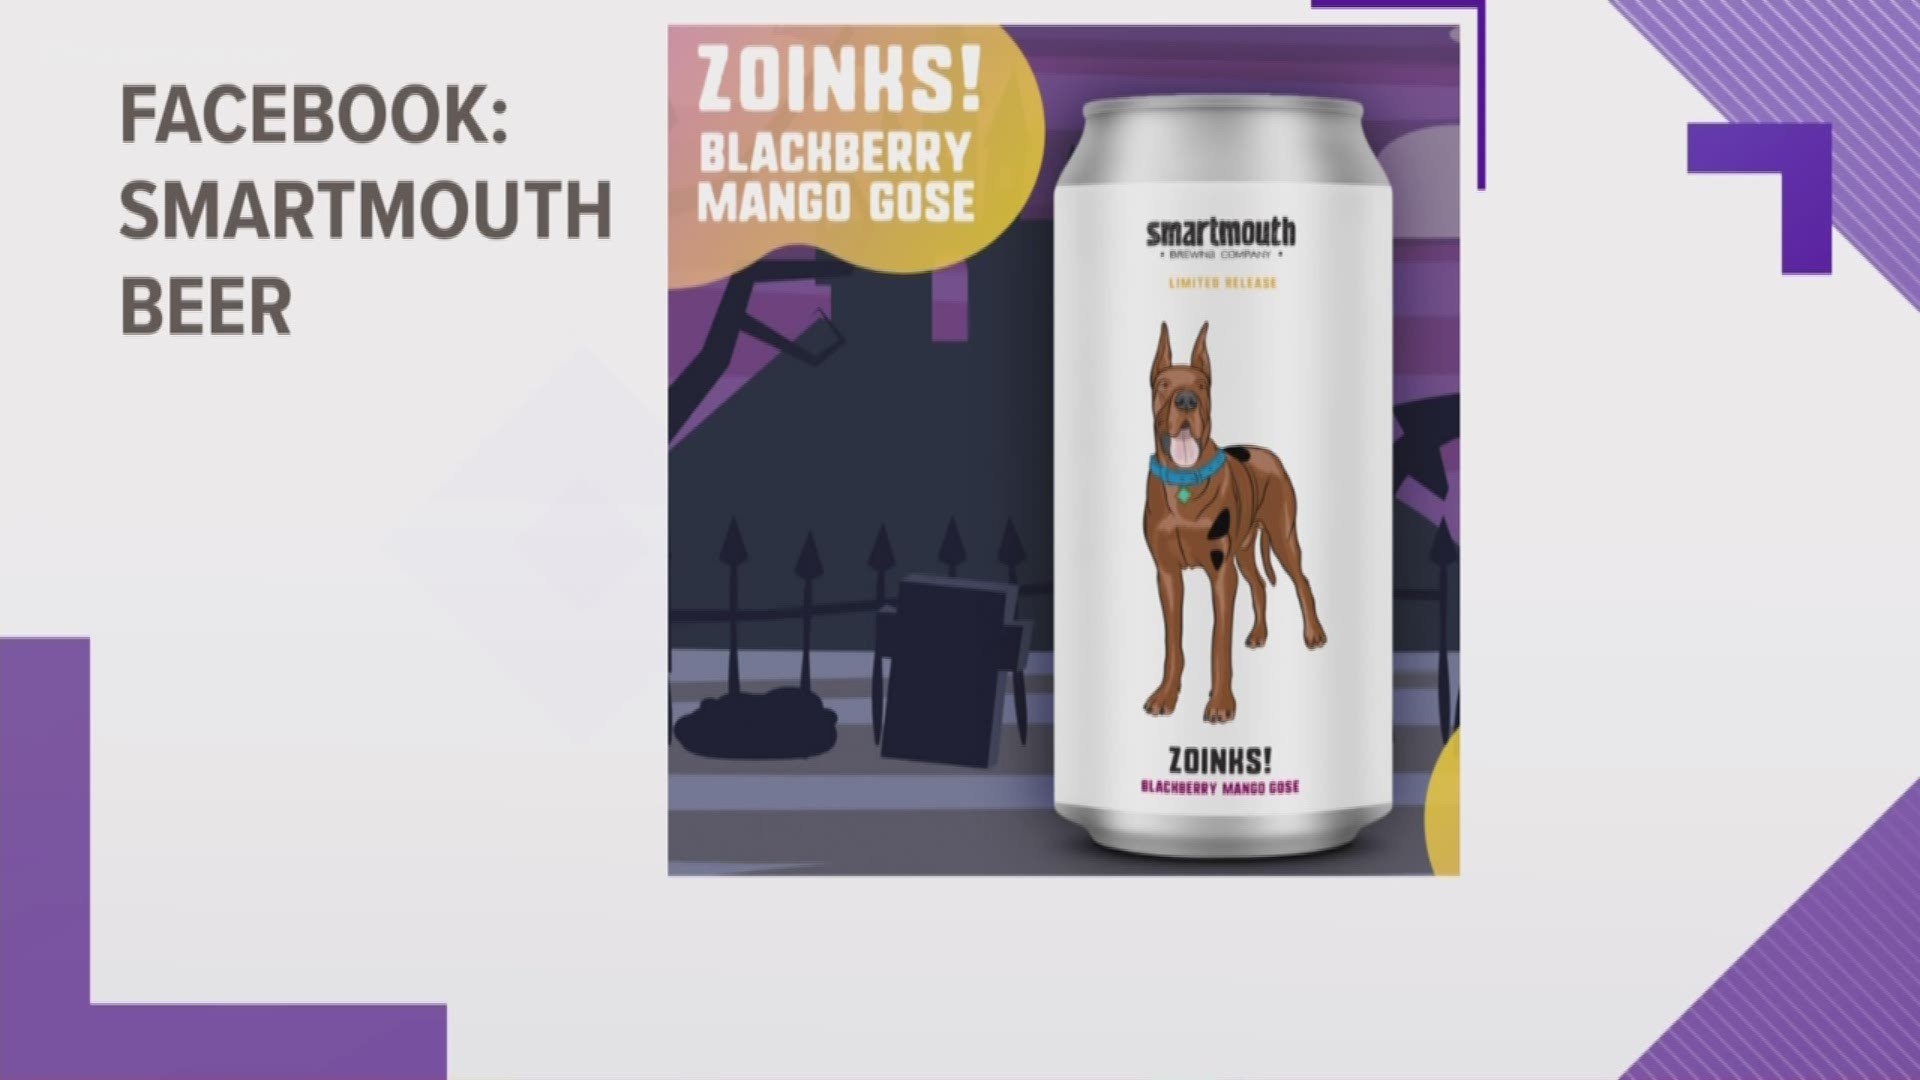 The Zoinks! Blackberry Mango Gose sour beer will be available for limited release at Smartmouth Brewing Company as a part of their FruityToons series.